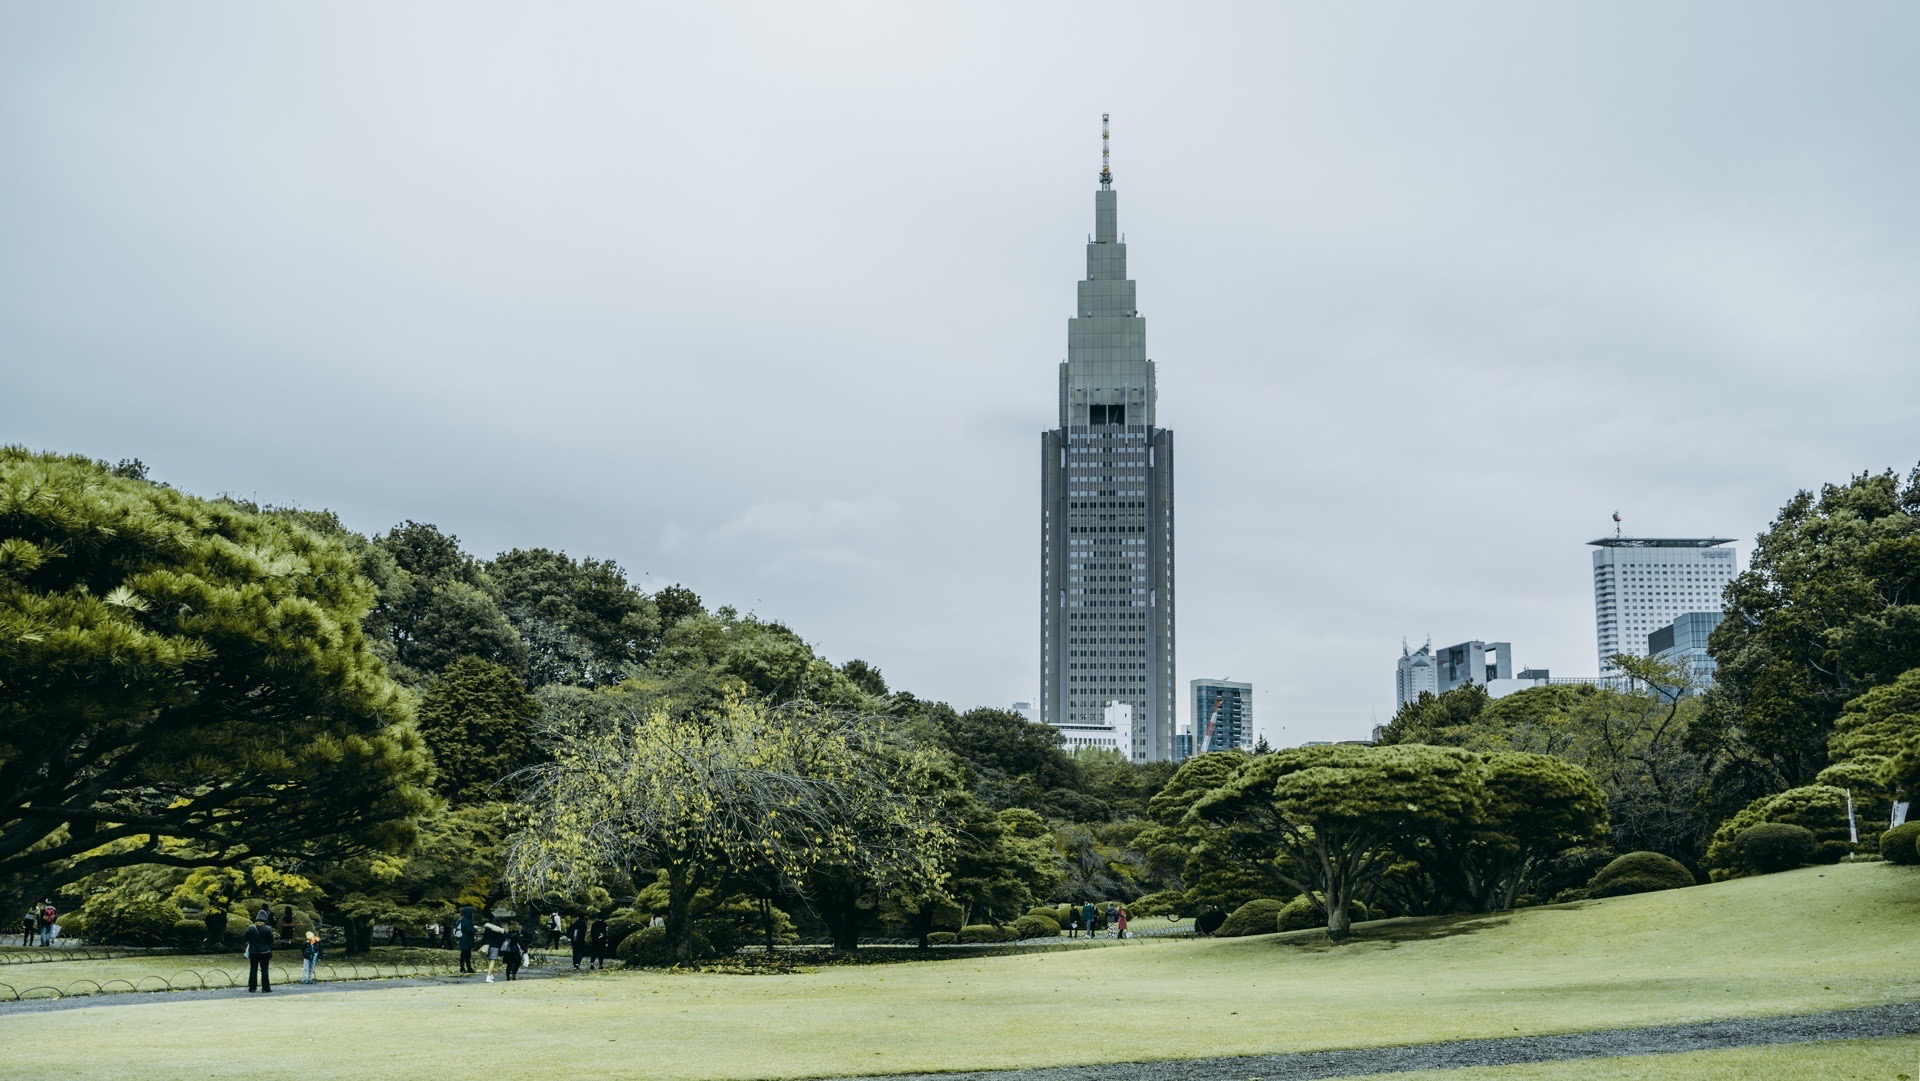 Ntt Docomo Yoyogi Building Attraction Reviews Ntt Docomo Yoyogi Building Tickets Ntt Docomo Yoyogi Building Discounts Ntt Docomo Yoyogi Building Transportation Address Opening Hours Attractions Hotels And Food